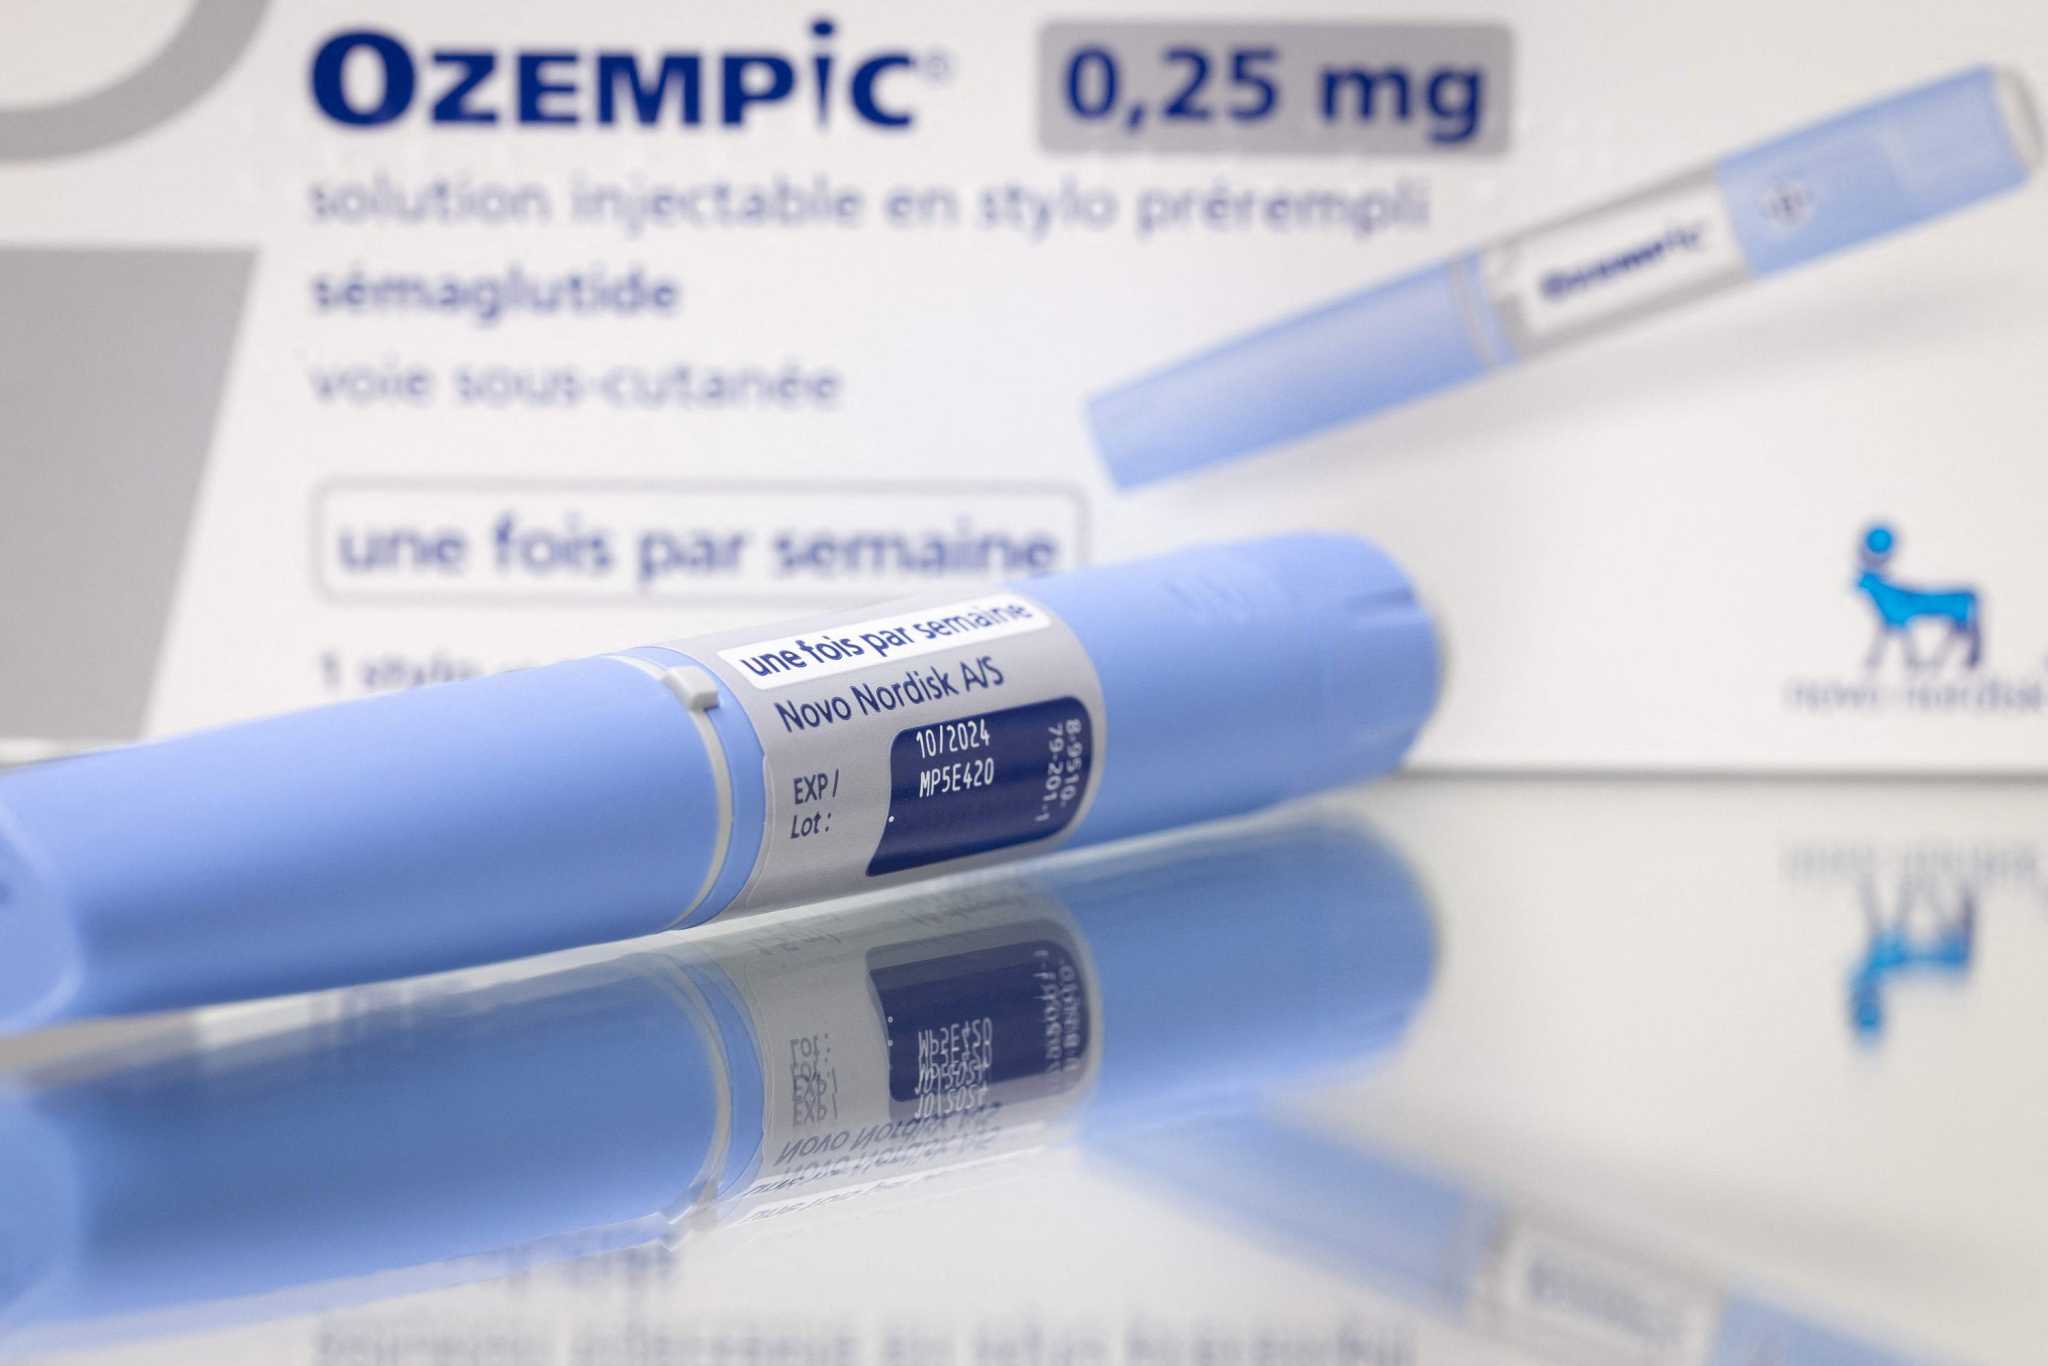 Counterfeit Ozempic shots seized by FDA